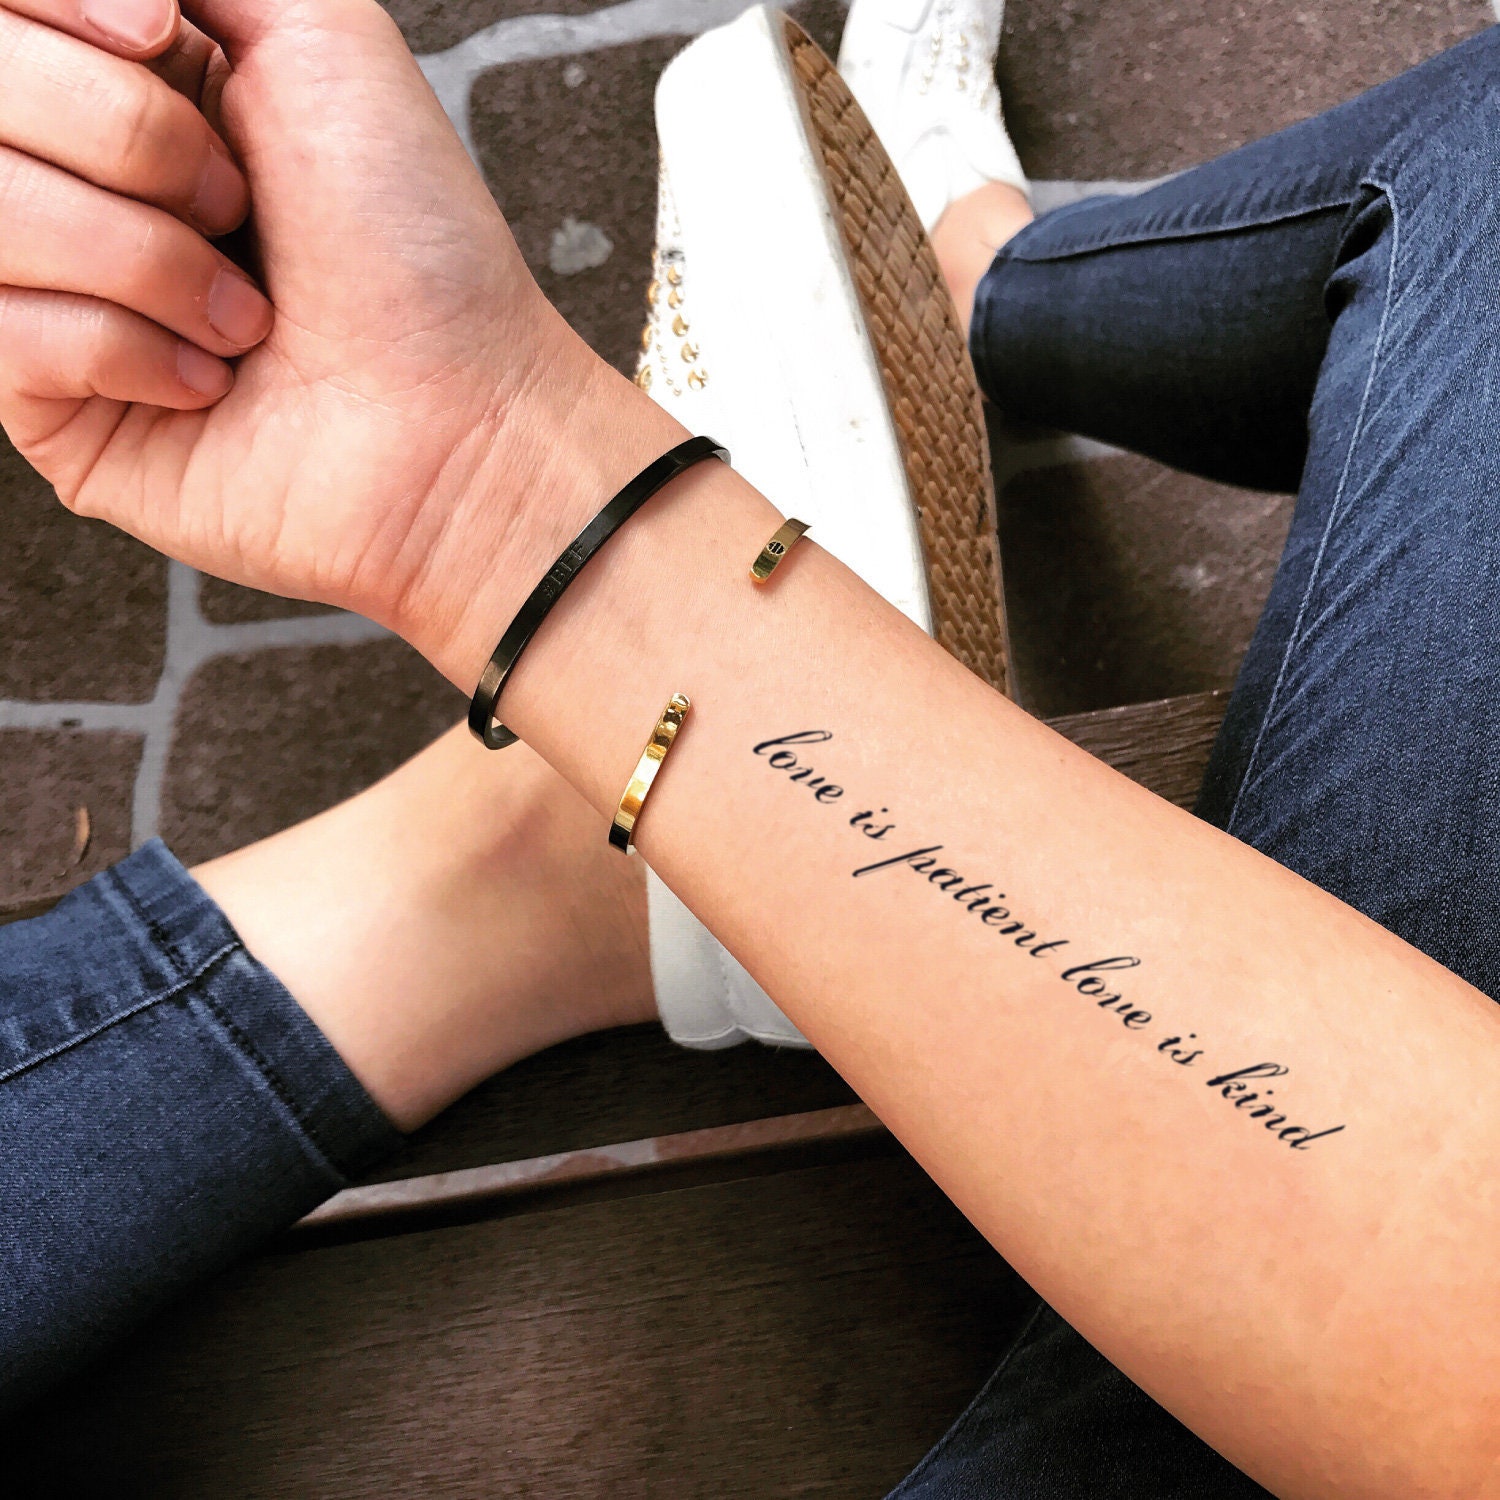 Love and Tattoos That Last  Our Favorite Romantic Tattoos